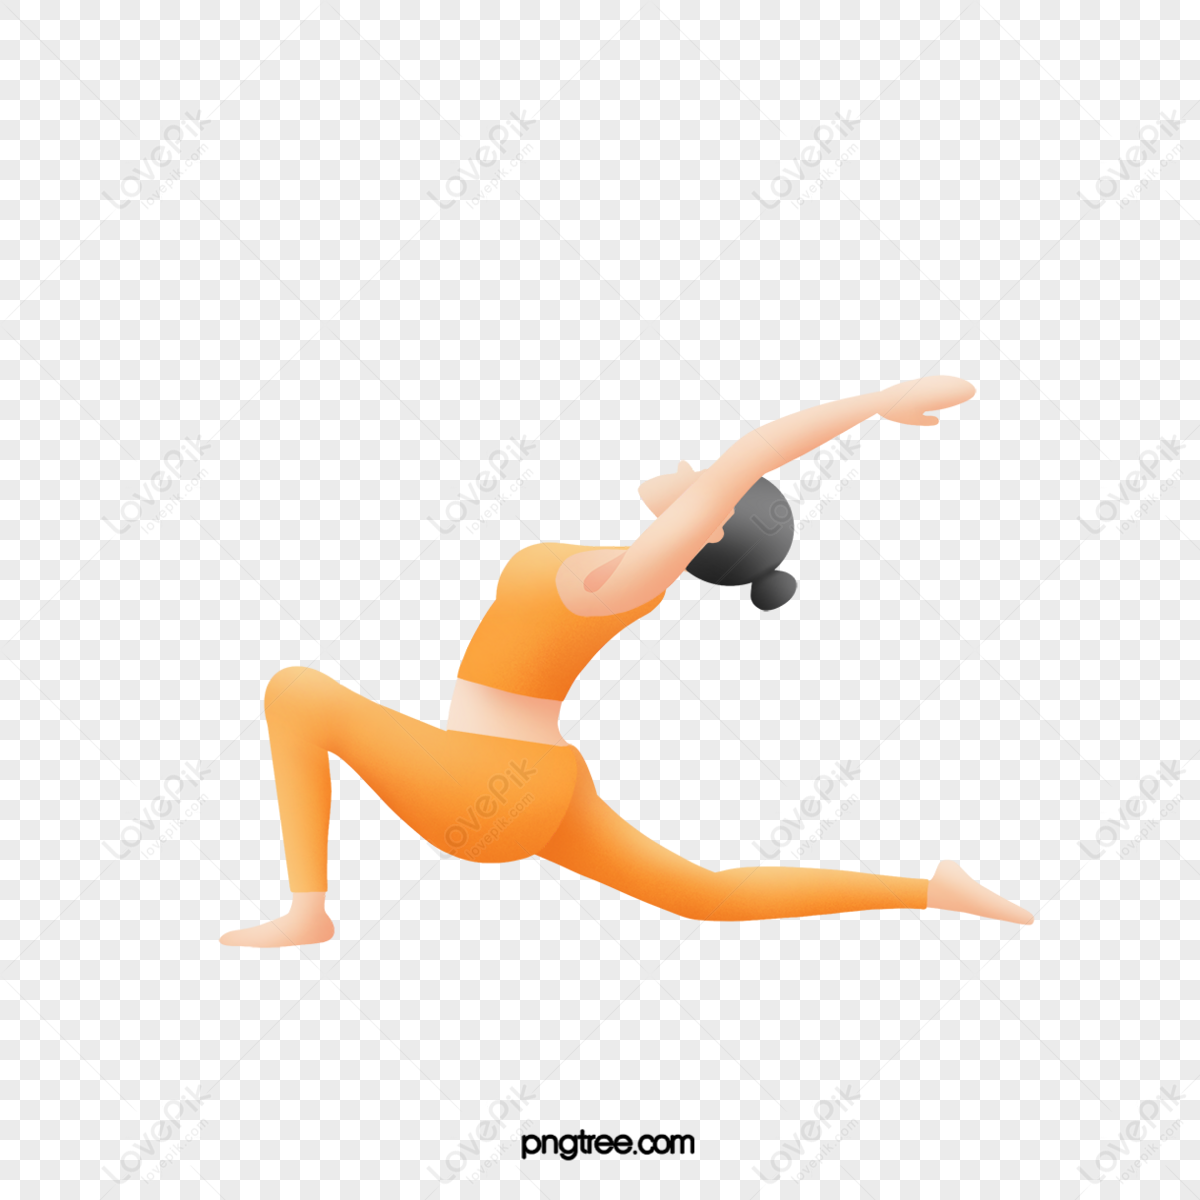 Woman performing yoga pose in silhouette image png download - 1472*2584 -  Free Transparent Yoga png Download. - CleanPNG / KissPNG